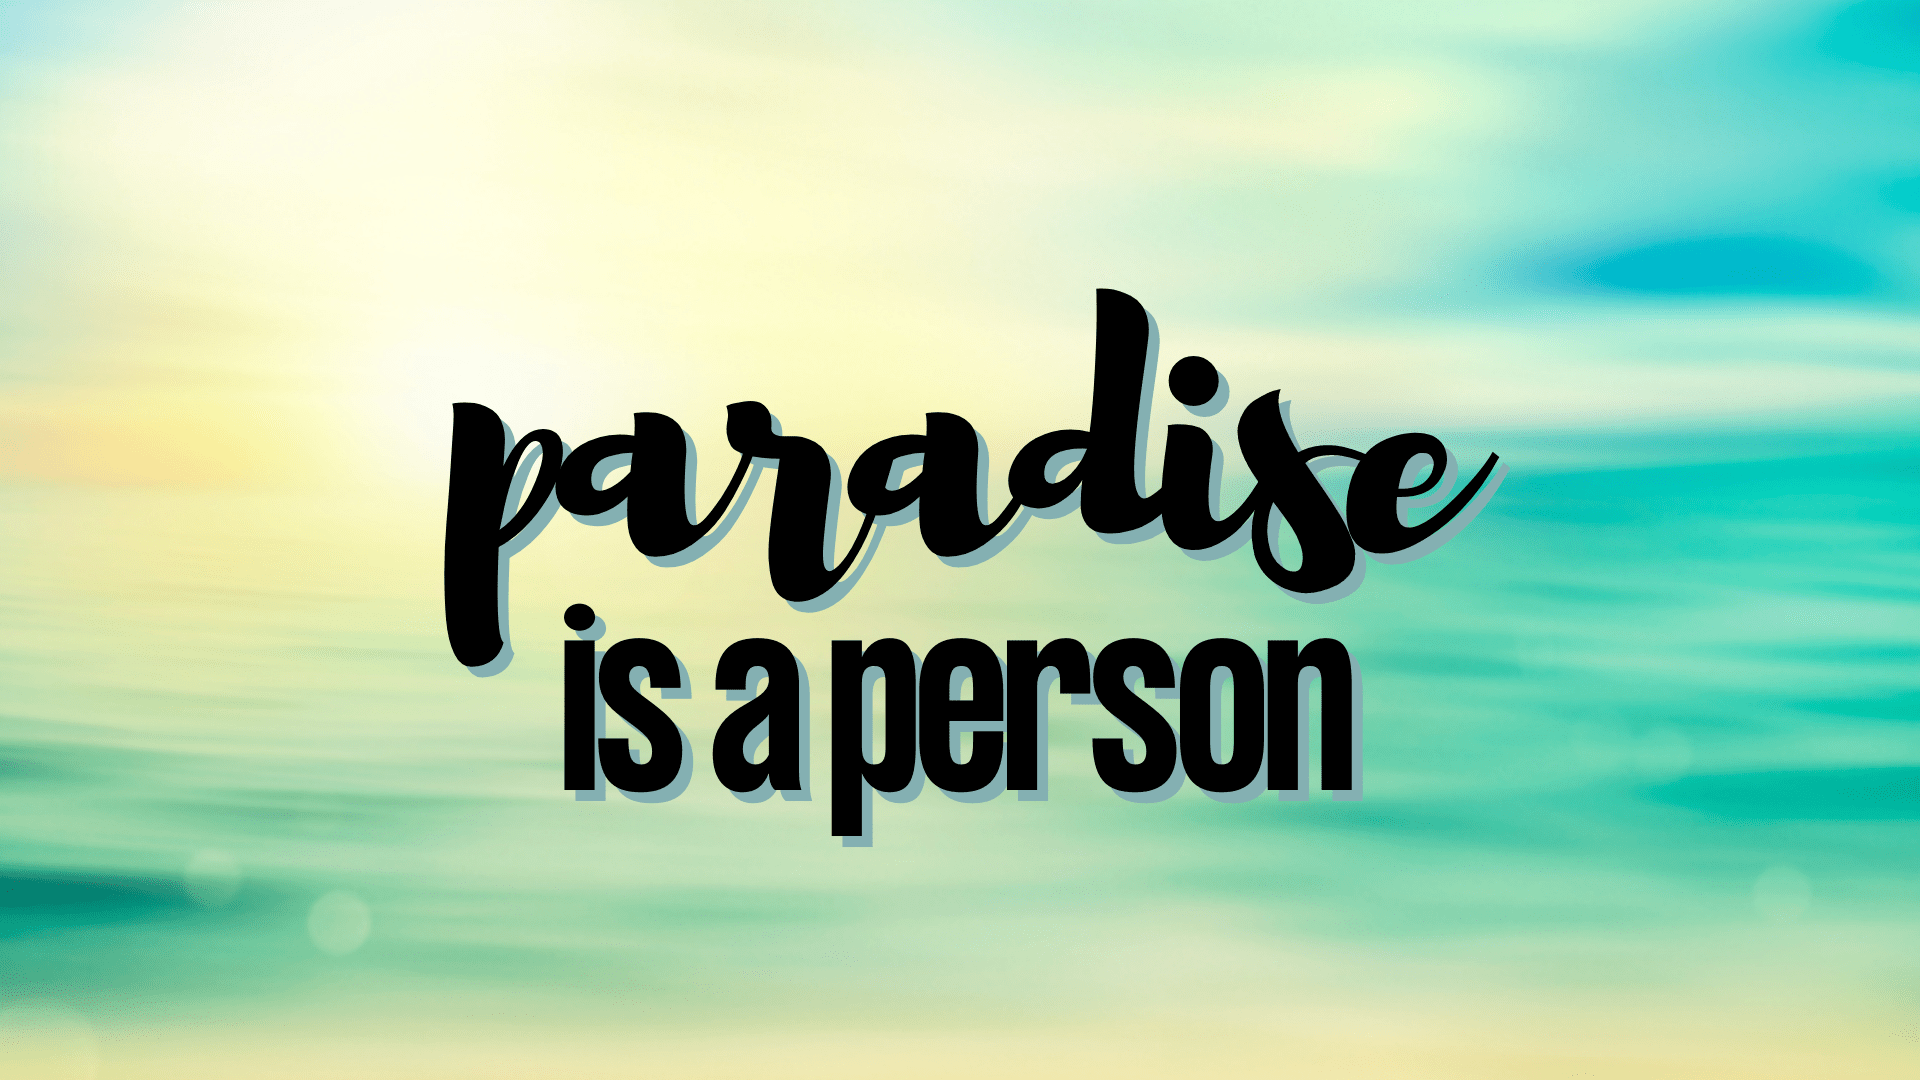 Paradise is a person